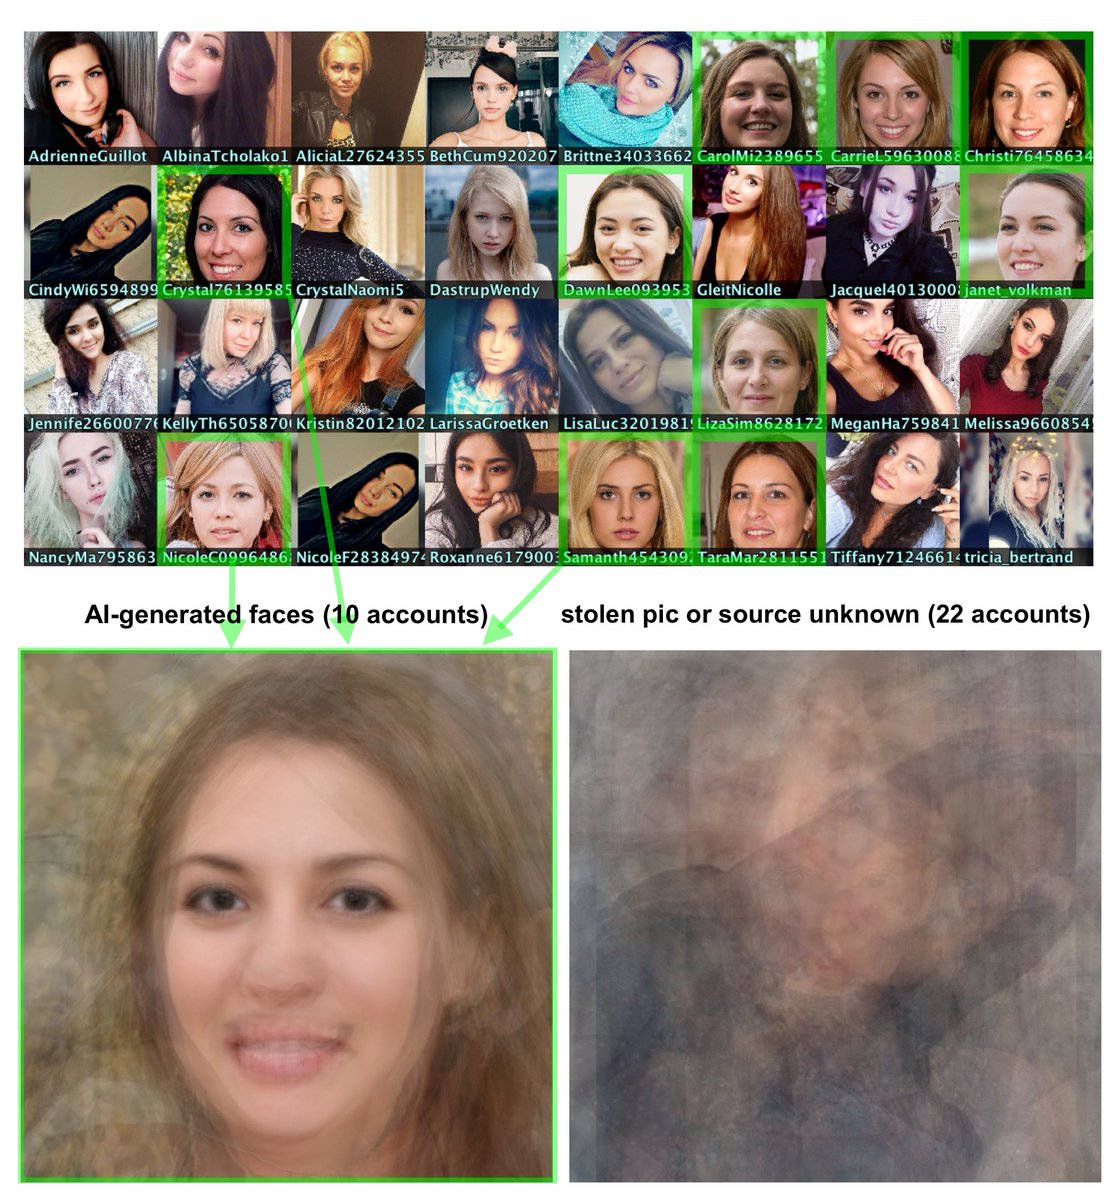 Here are the profile pics for all 32 accounts. The 10 with green borders all have the eyes in the exact same position and bear other artifacts of AI generation; for the sake of comparison we also show the results of blending the likely real photos used by the other 22 accounts.